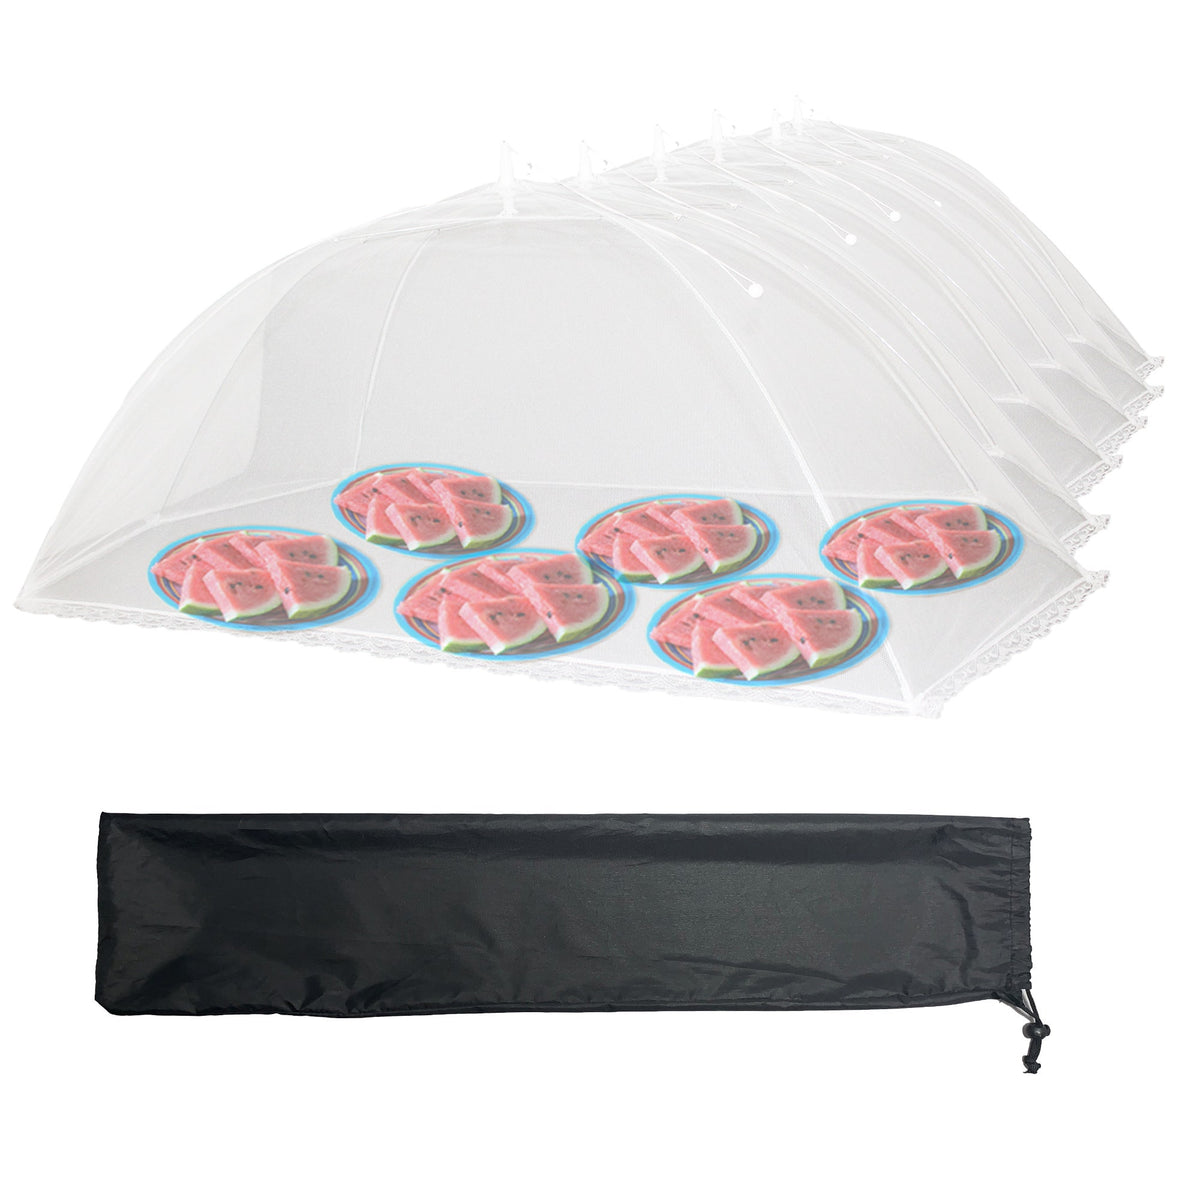 6pk Pop-Up 47x26" Jumbo Outdoor Food Tent Covers - Keep Bugs Out